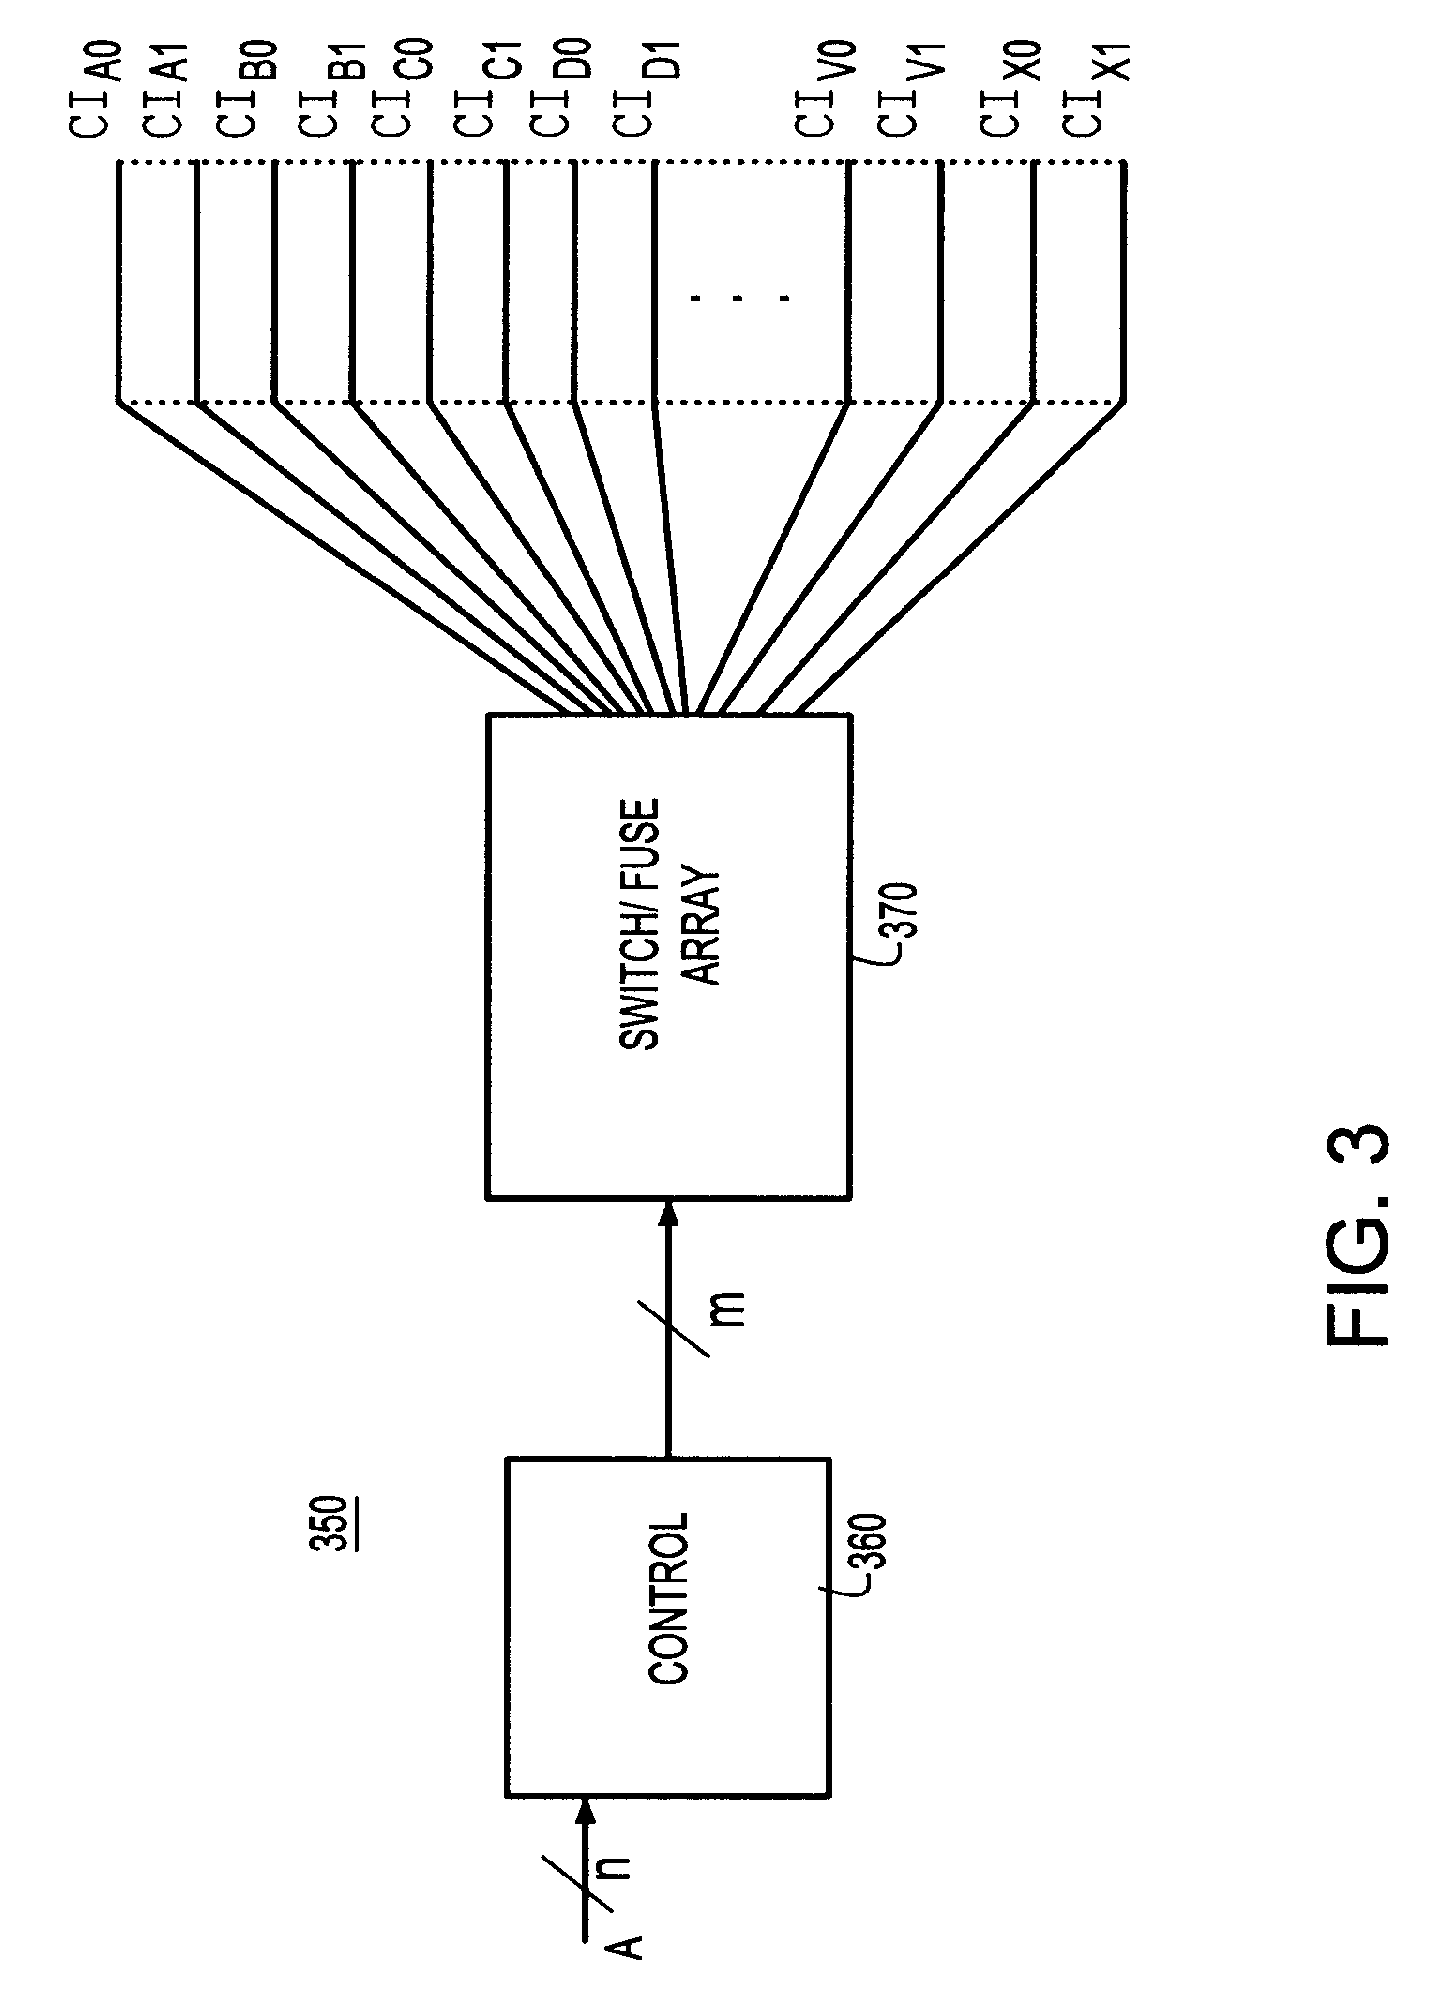 On-chip electromigration monitoring system